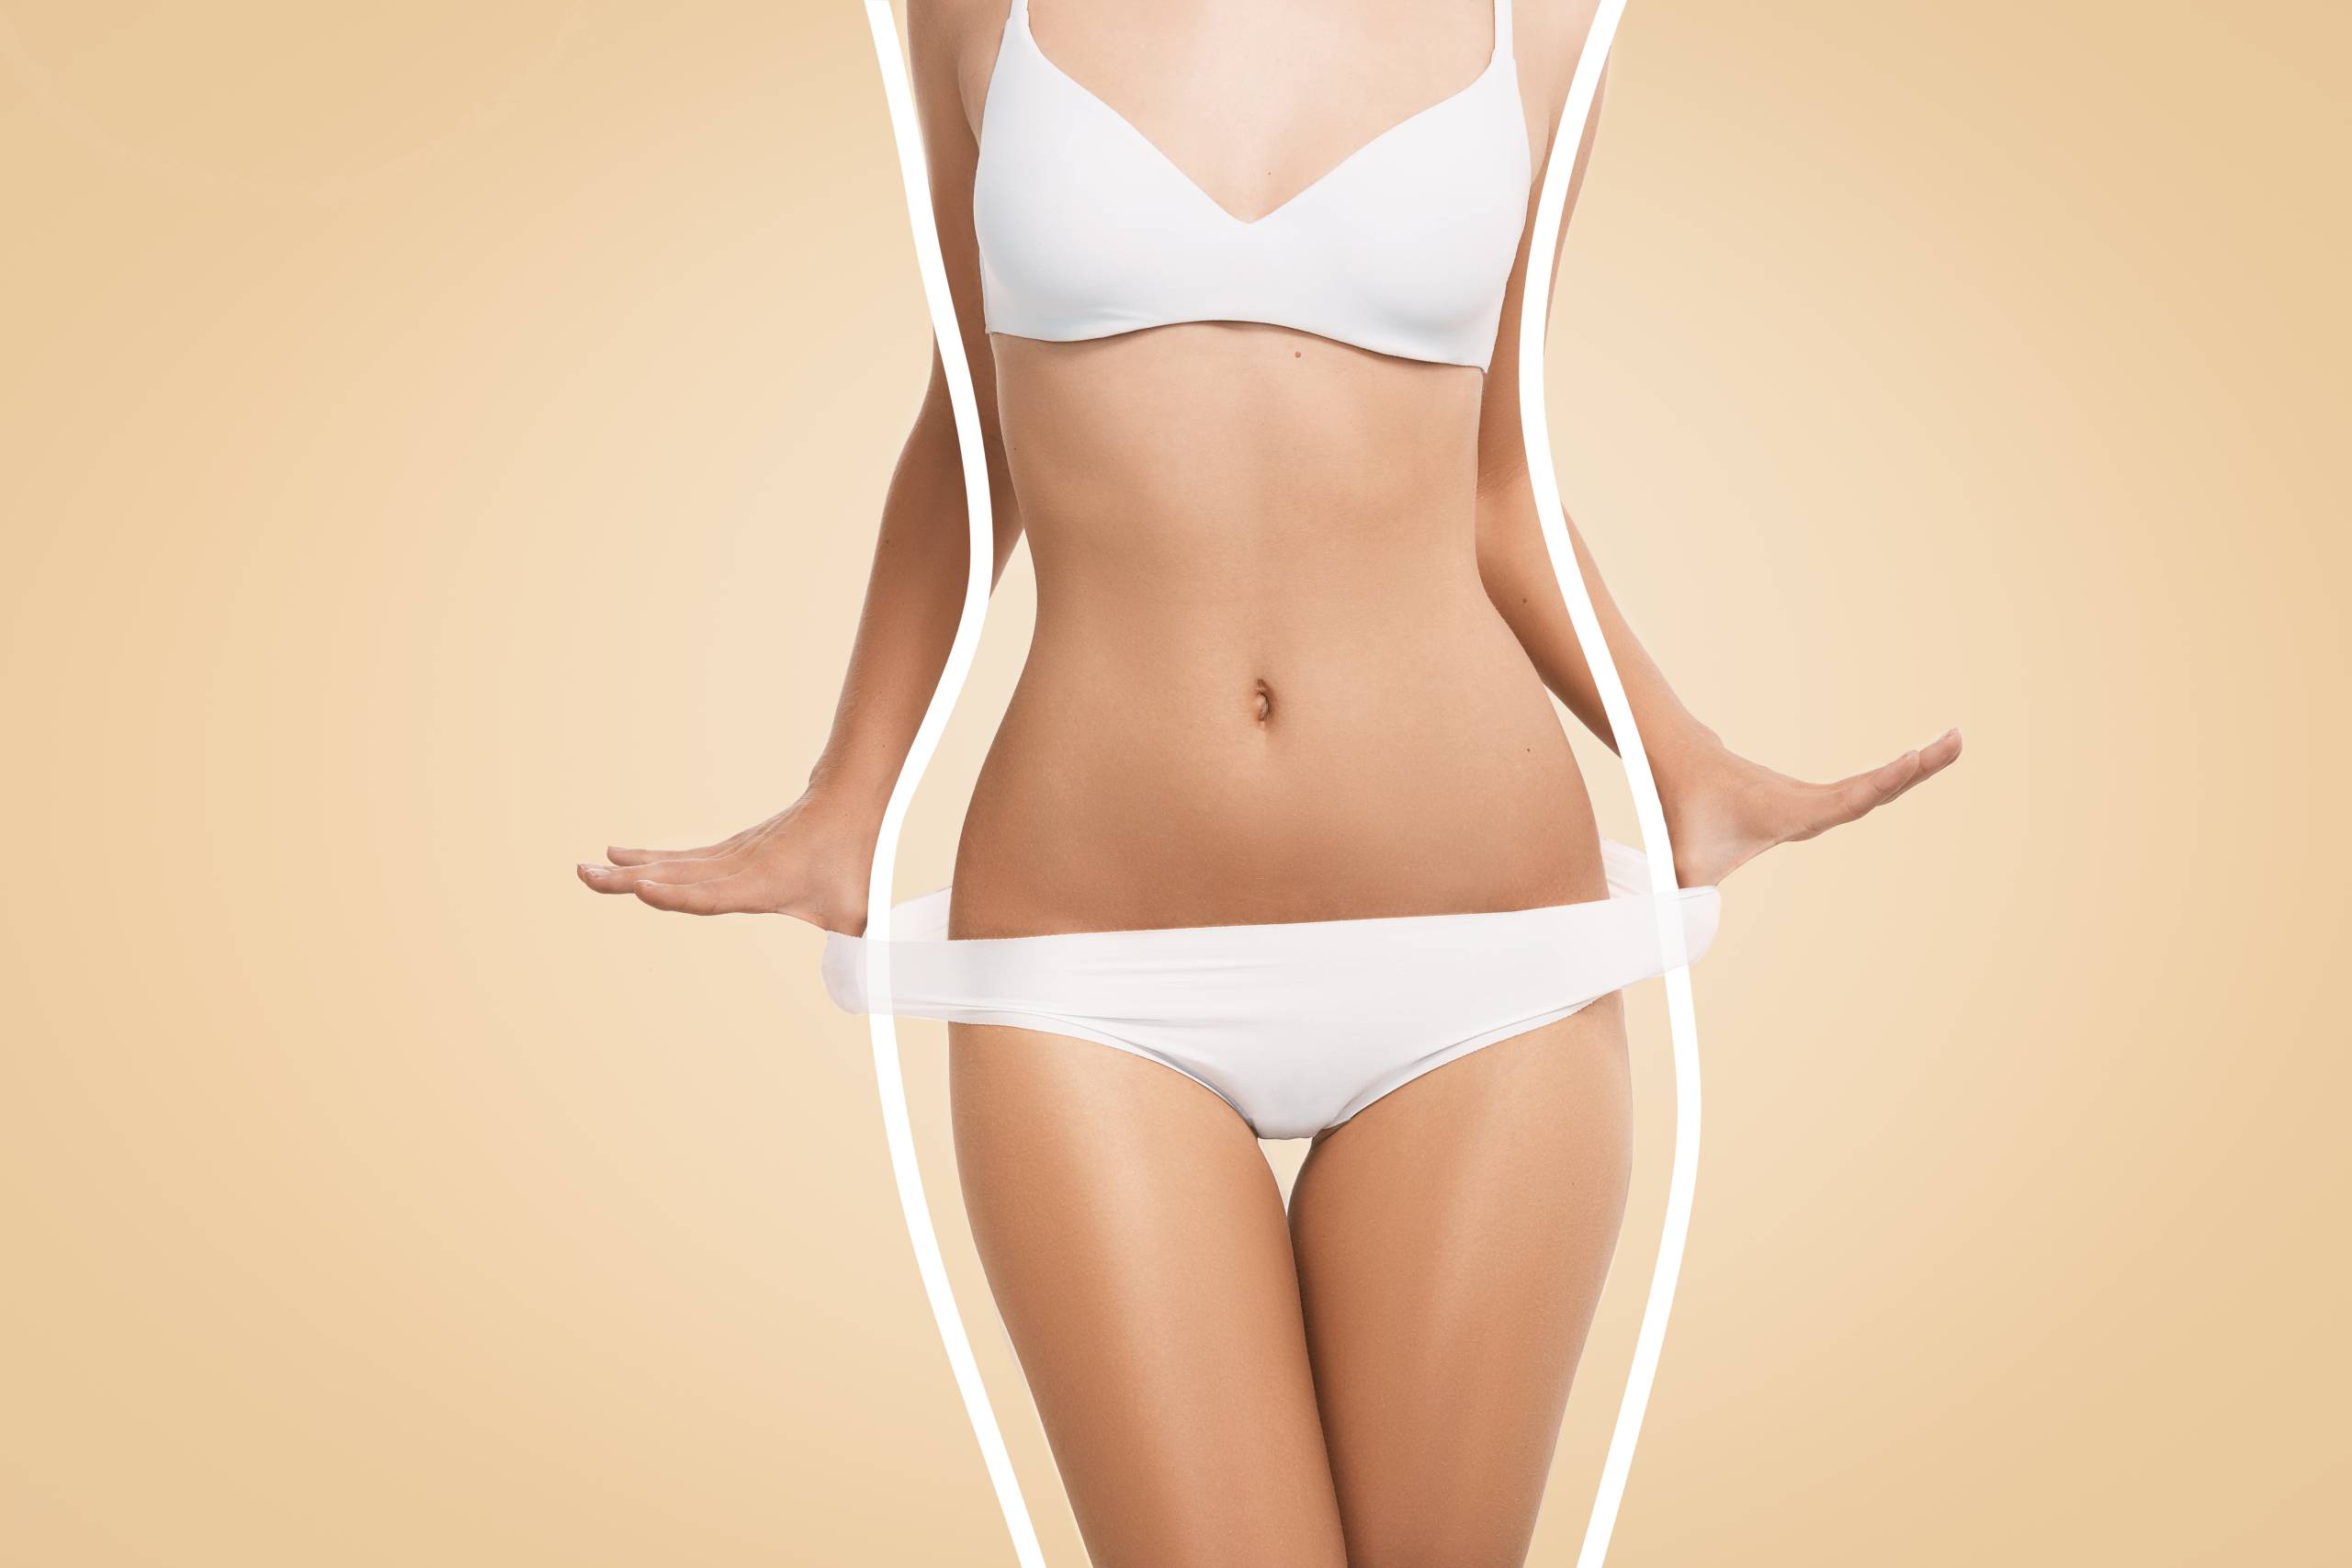 10 Things You Should Know Before Having Breast Aesthetic Surgery